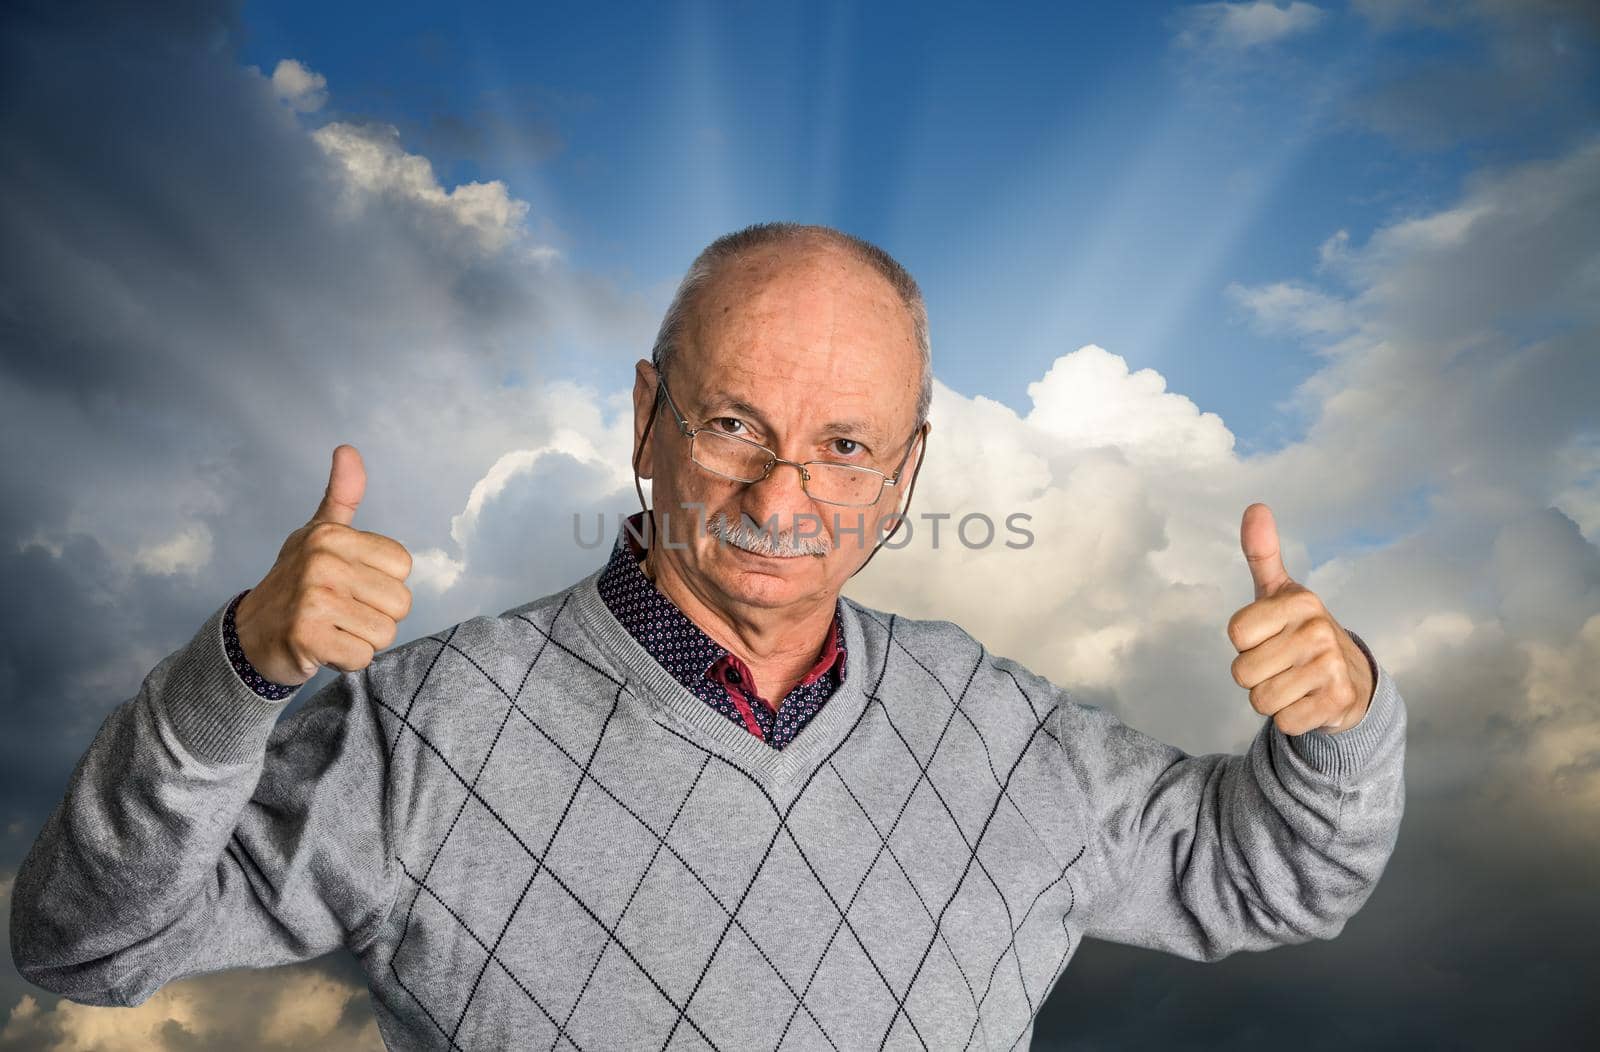 Free happy retired senior man with glasses enjoying the outdoors with cloudy sky and shows thumb up.